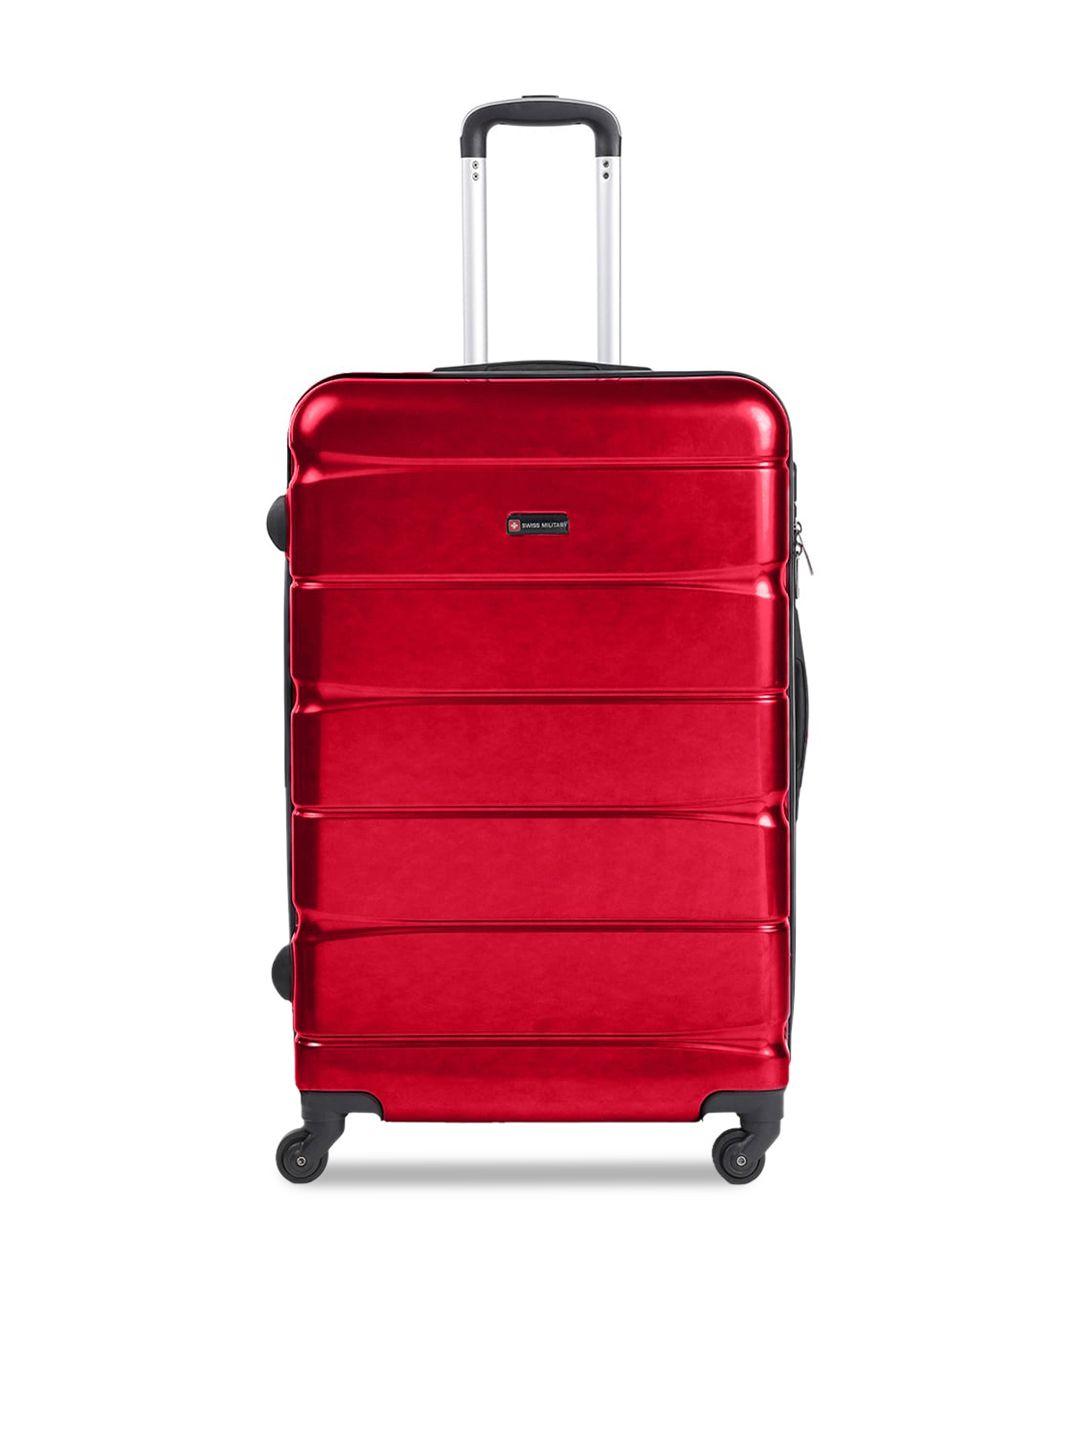 swiss military water resistant hard-sided large trolley suitcase